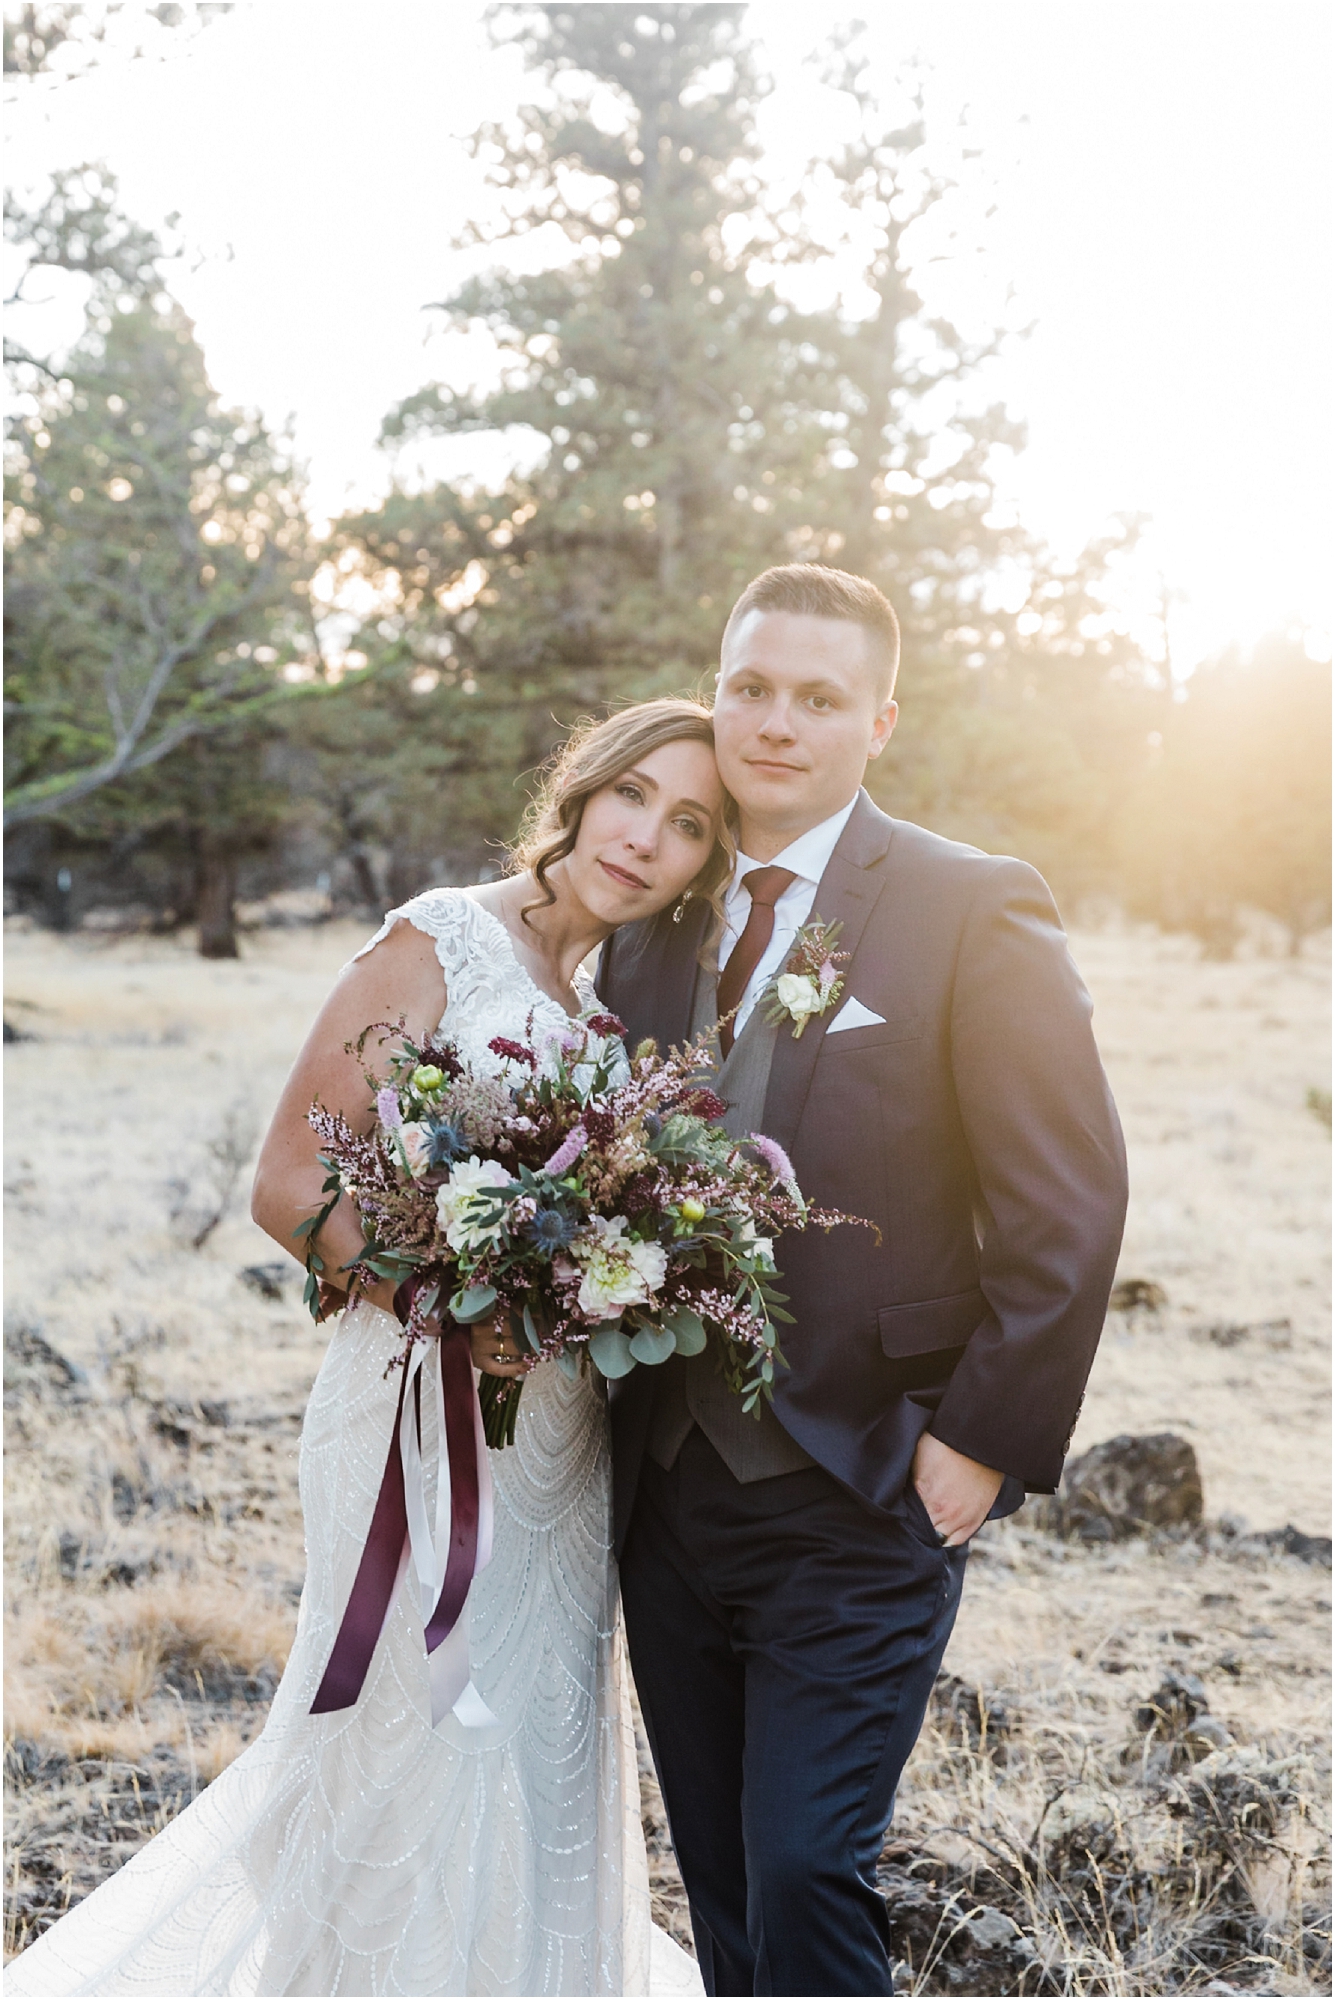 A bride and groom stand amongst the juniper trees in the high desert of Oregon, a beautiful place to elope in Bend Oregon. | Erica Swantek Photography